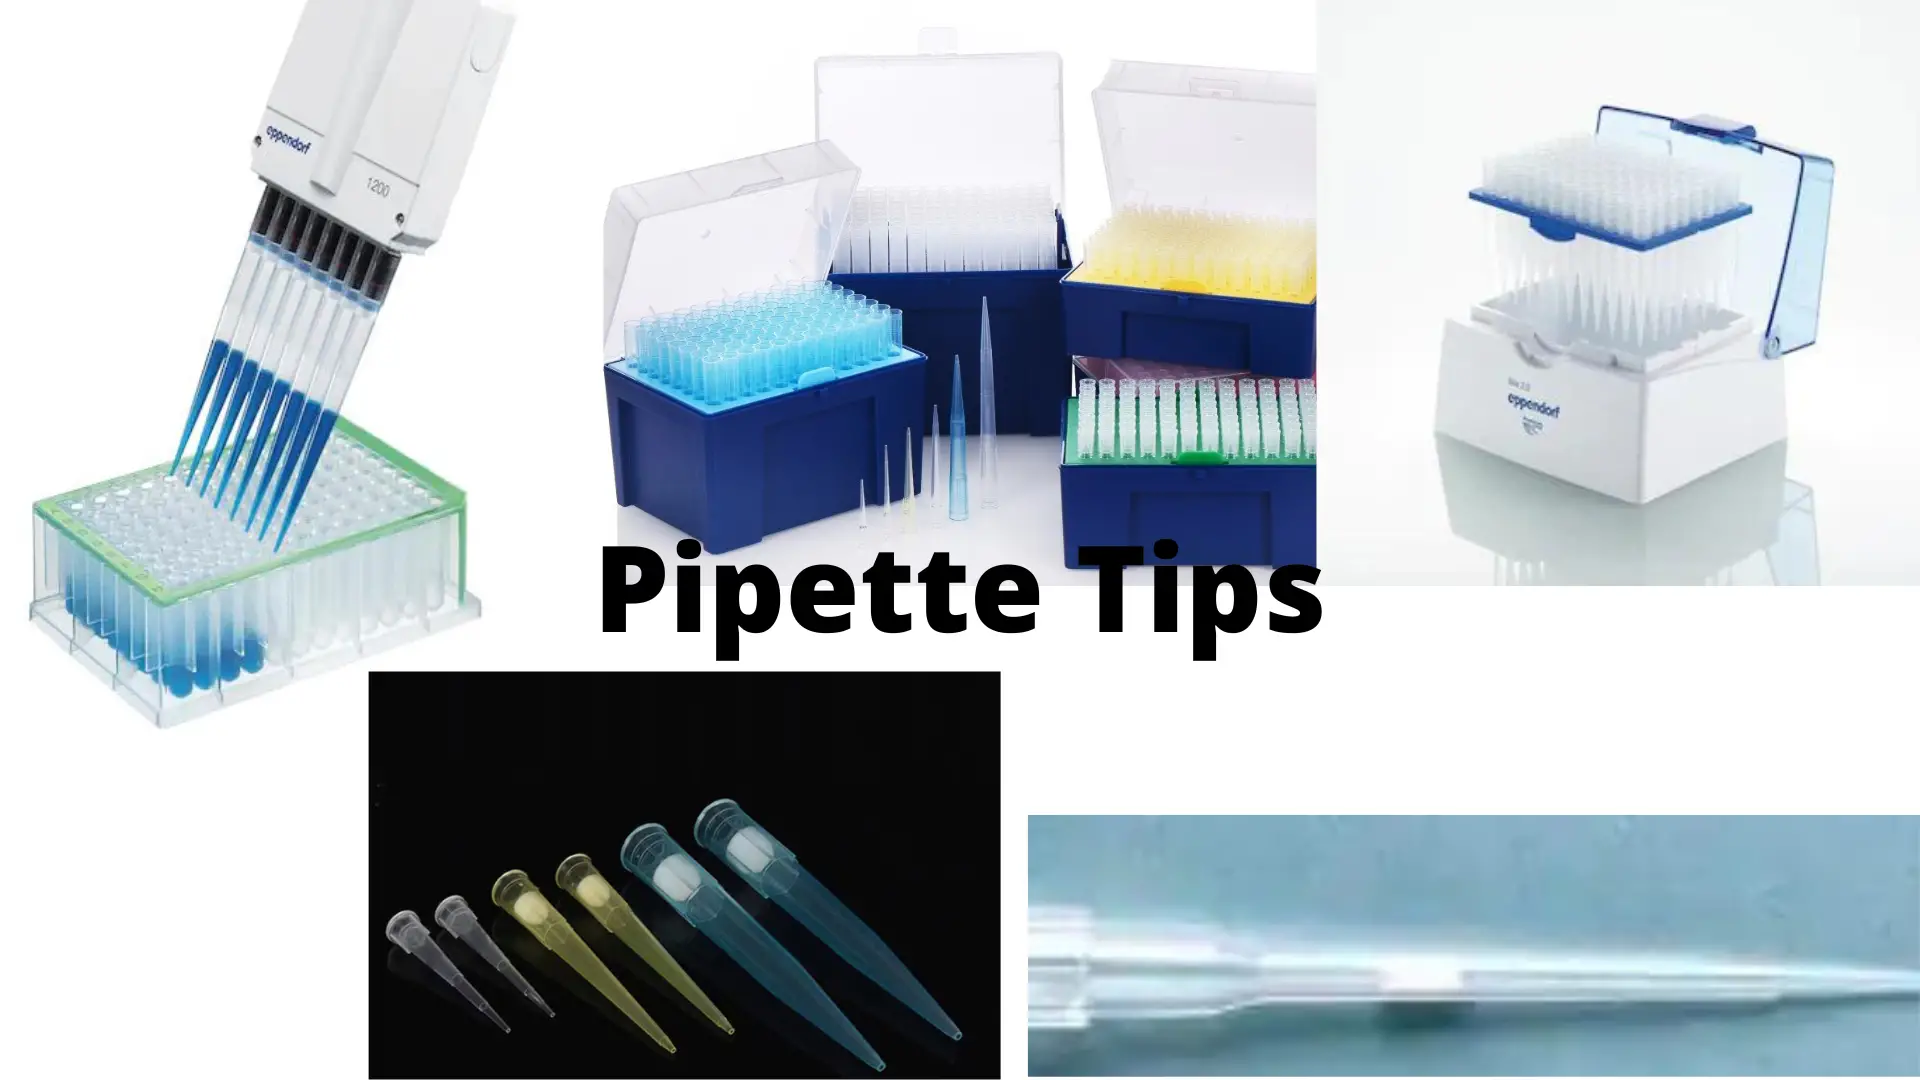 Pipette Tips: Types, Uses, and Criteria to Choose It